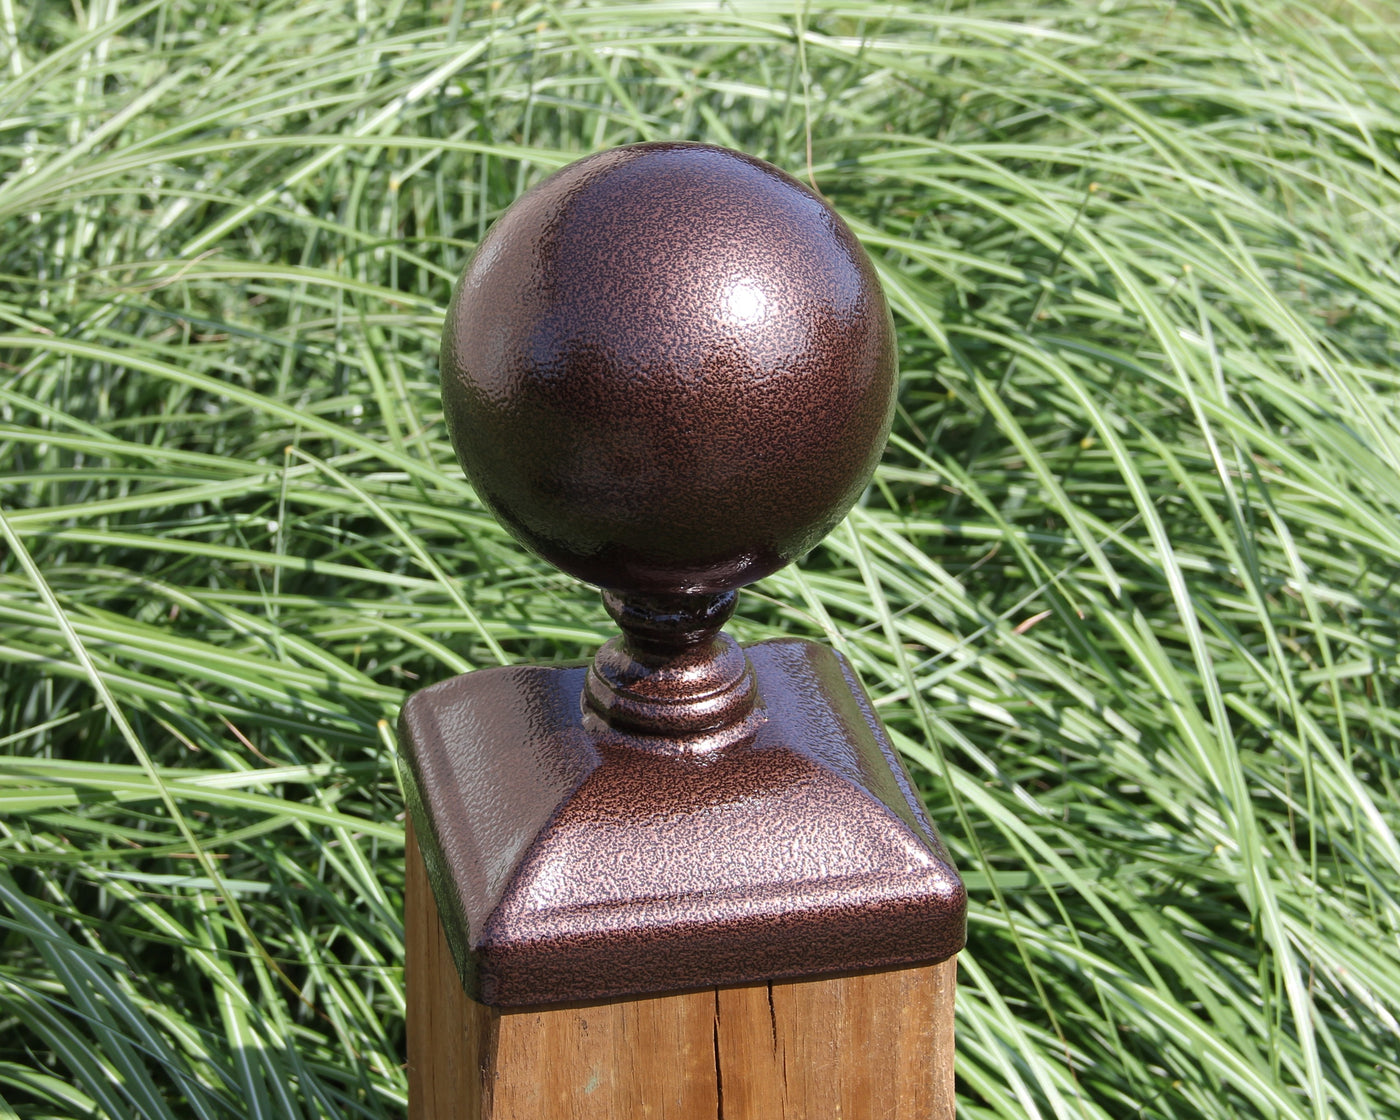 6x6 Post Cap, Large 5" Cannonball - Madison Iron and Wood - Post Cap - metal outdoor decor - Steel deocrations - american made products - veteran owned business products - fencing decorations - fencing supplies - custom wall decorations - personalized wall signs - steel - decorative post caps - steel post caps - metal post caps - brackets - structural brackets - home improvement - easter - easter decorations - easter gift - easter yard decor